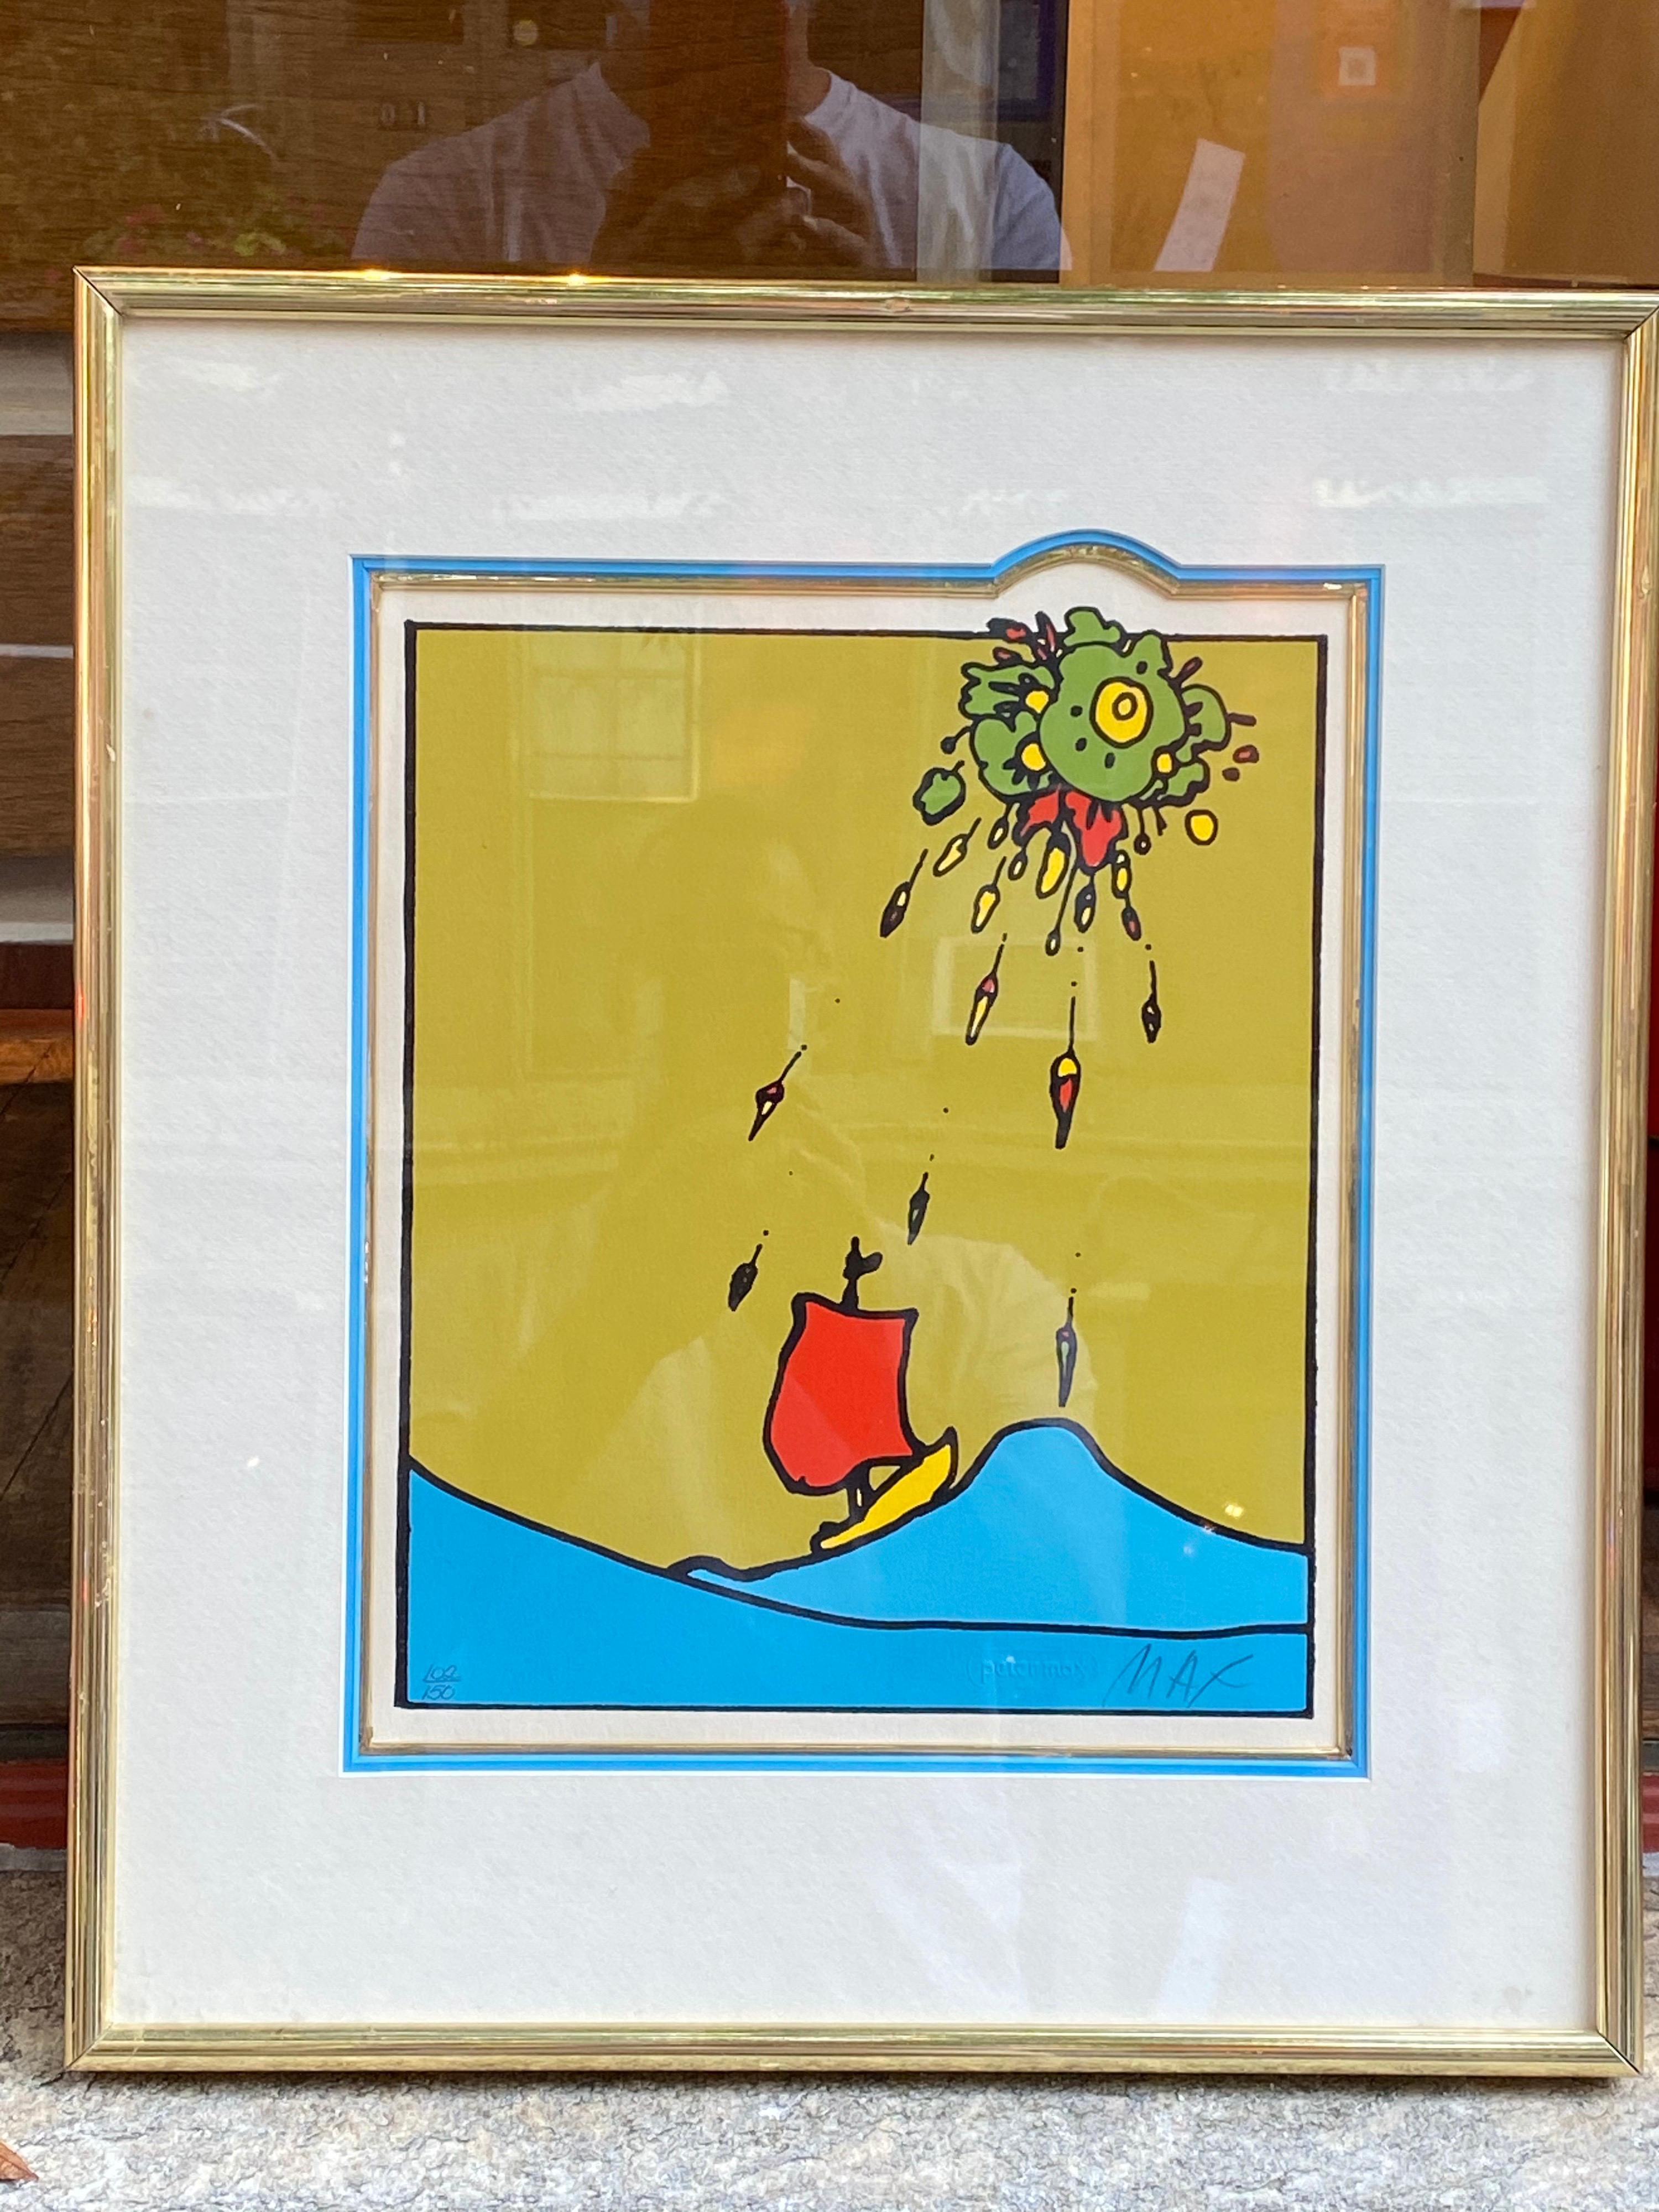 Peter Max Little Sailboat with Red Sail 1974. Image area measures: 10